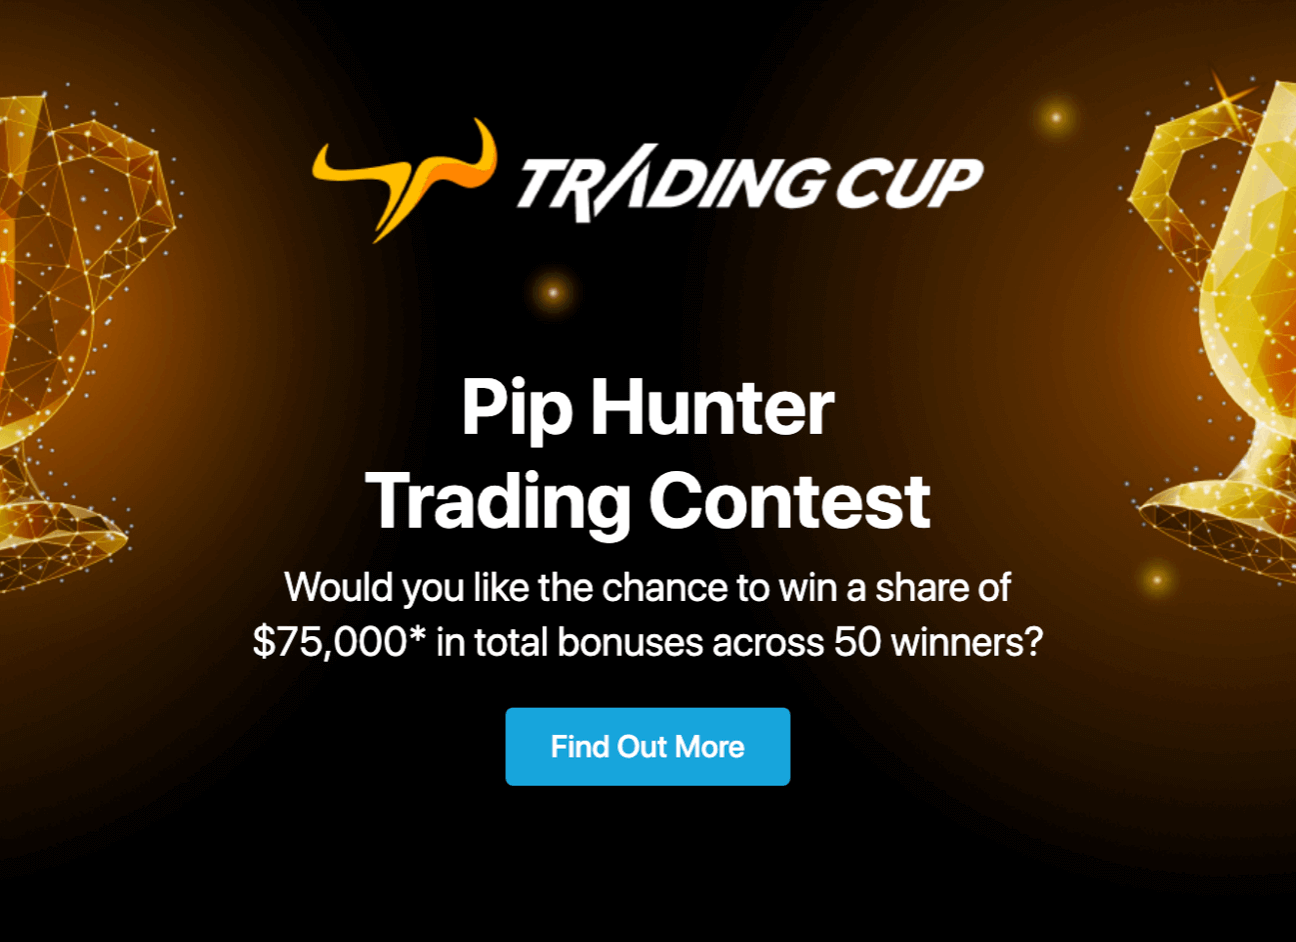 TradingCup Pip Hunter Trading Contest